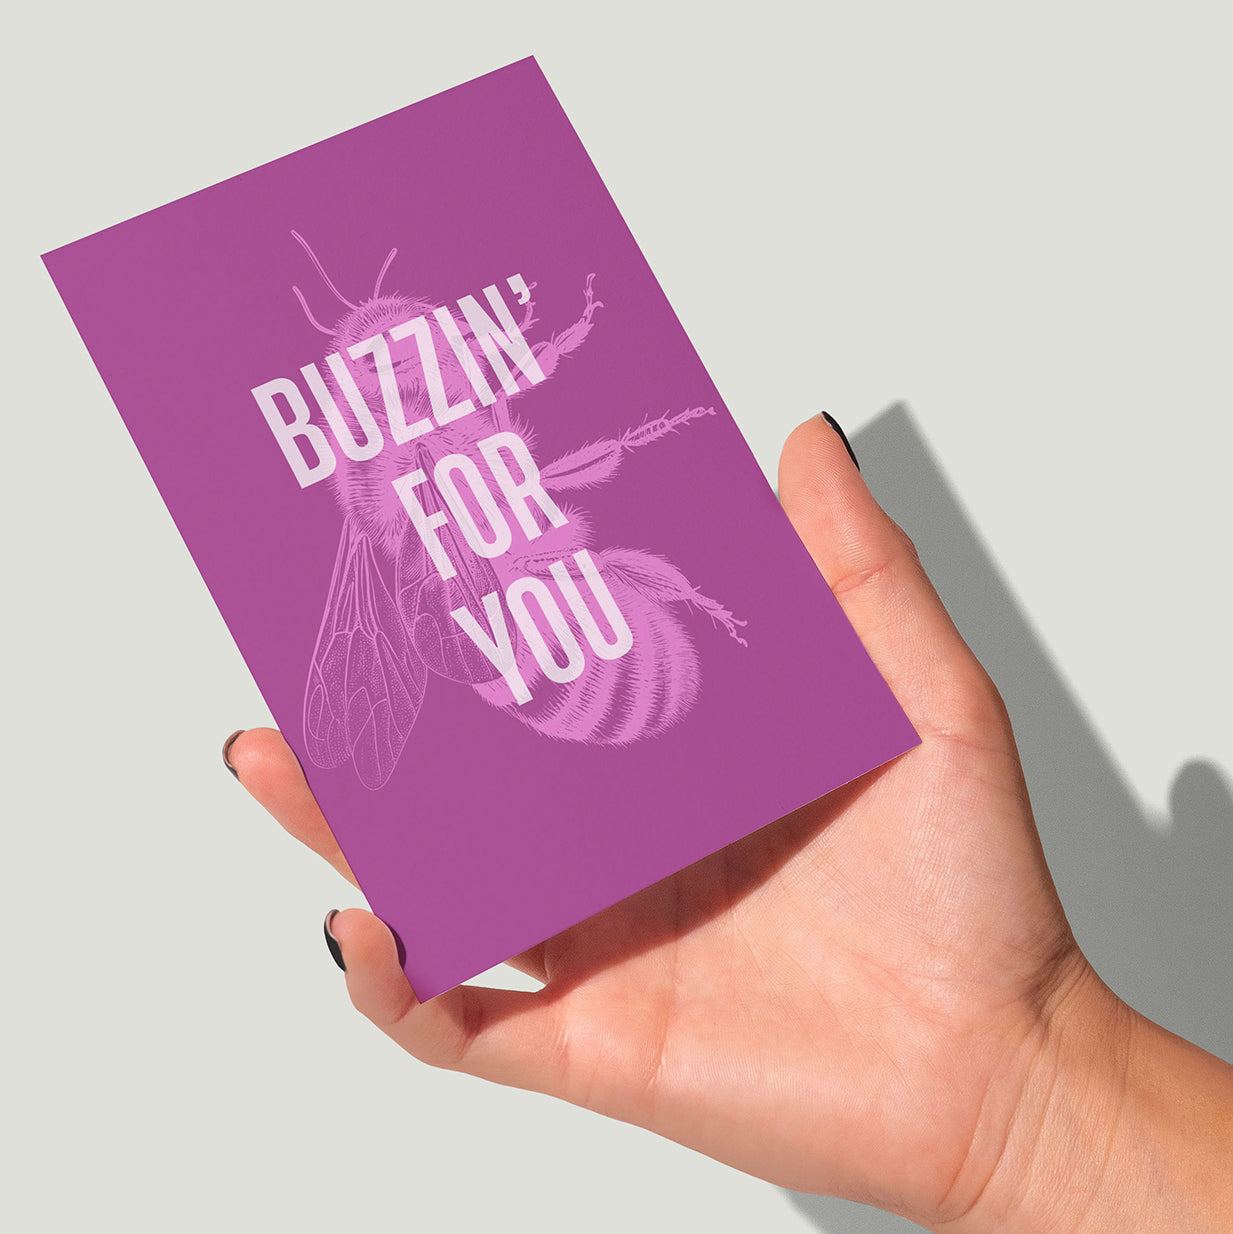 Buzzin' For You Card | Congratulations Card | Celebration | Well Done